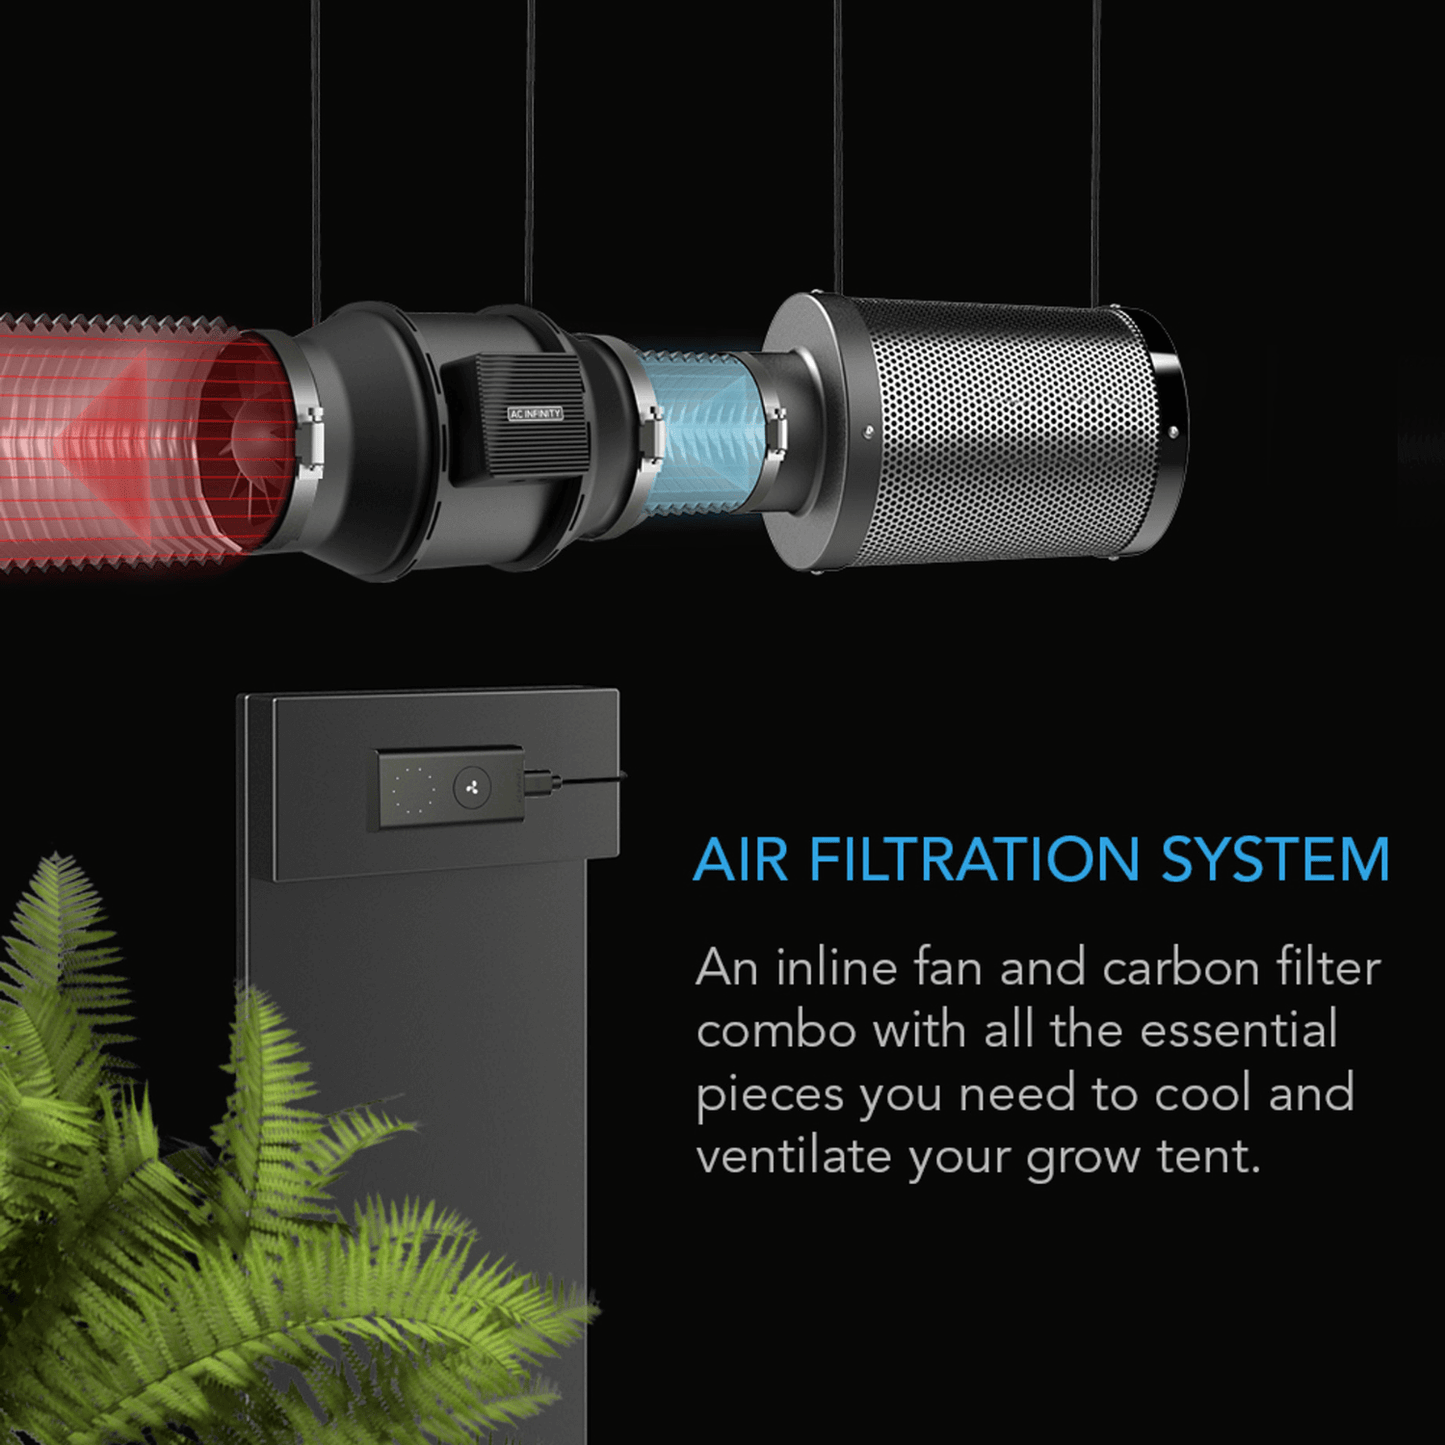 AC Infinity Air Filtration Kit 4", Inline Fan with Speed Controller, Carbon Filter & Ducting Combo AC-FKS4 Ventilation